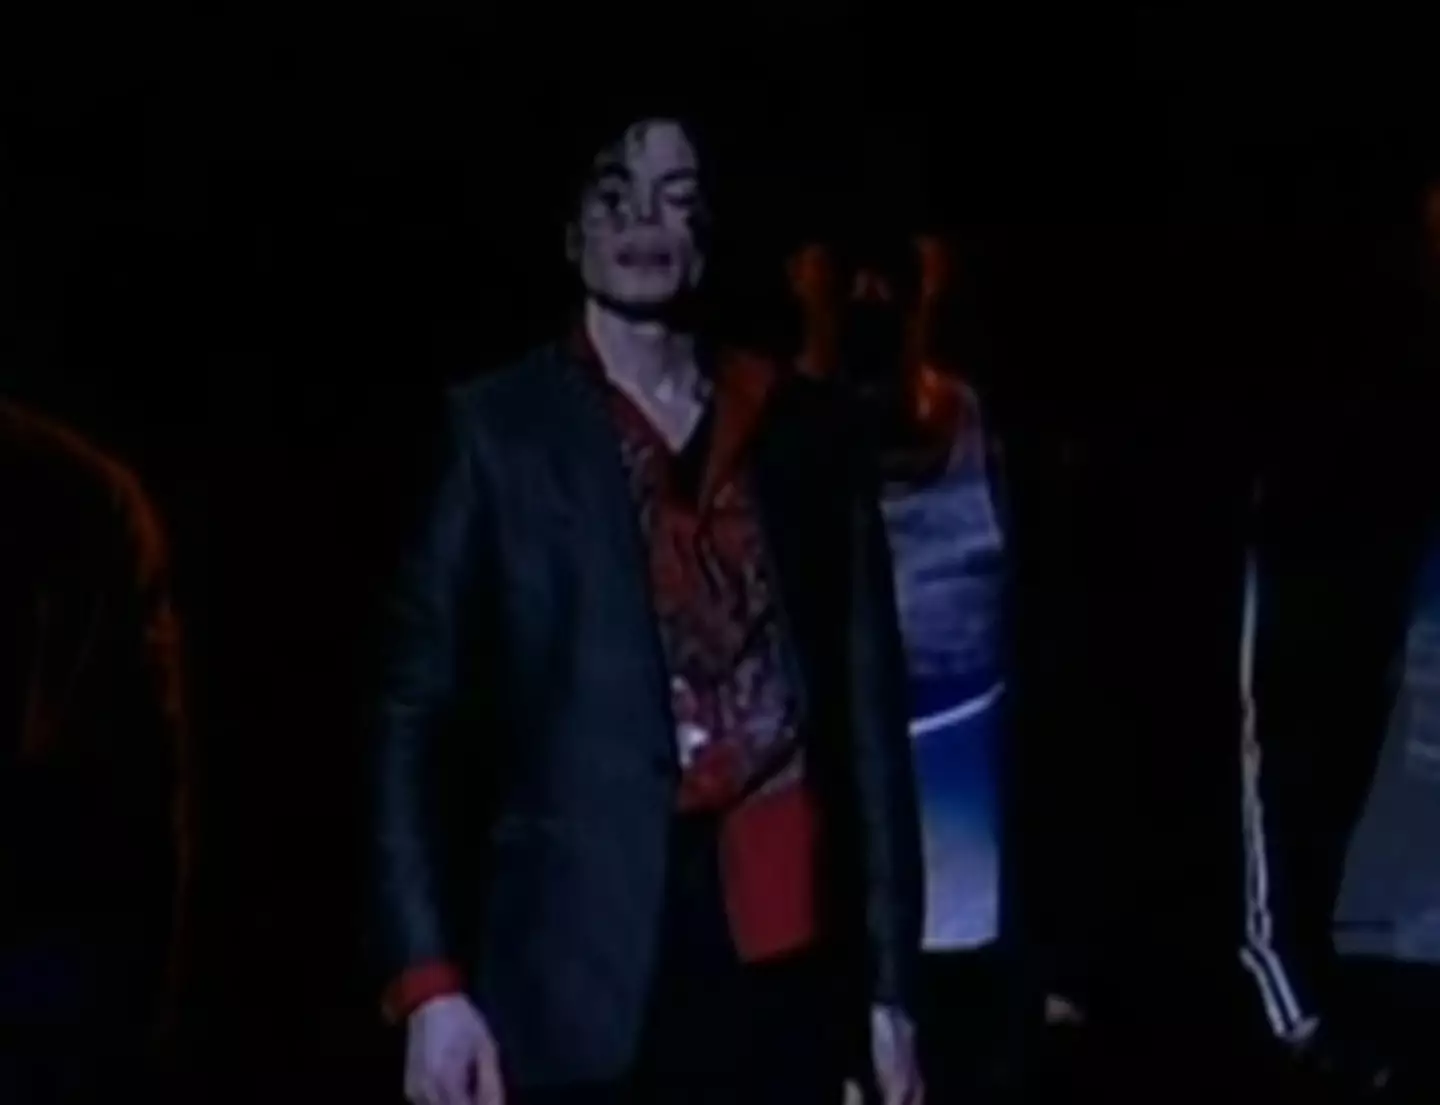 Michael Jackson's final moment on camera showed him rehearsing for This Is It.